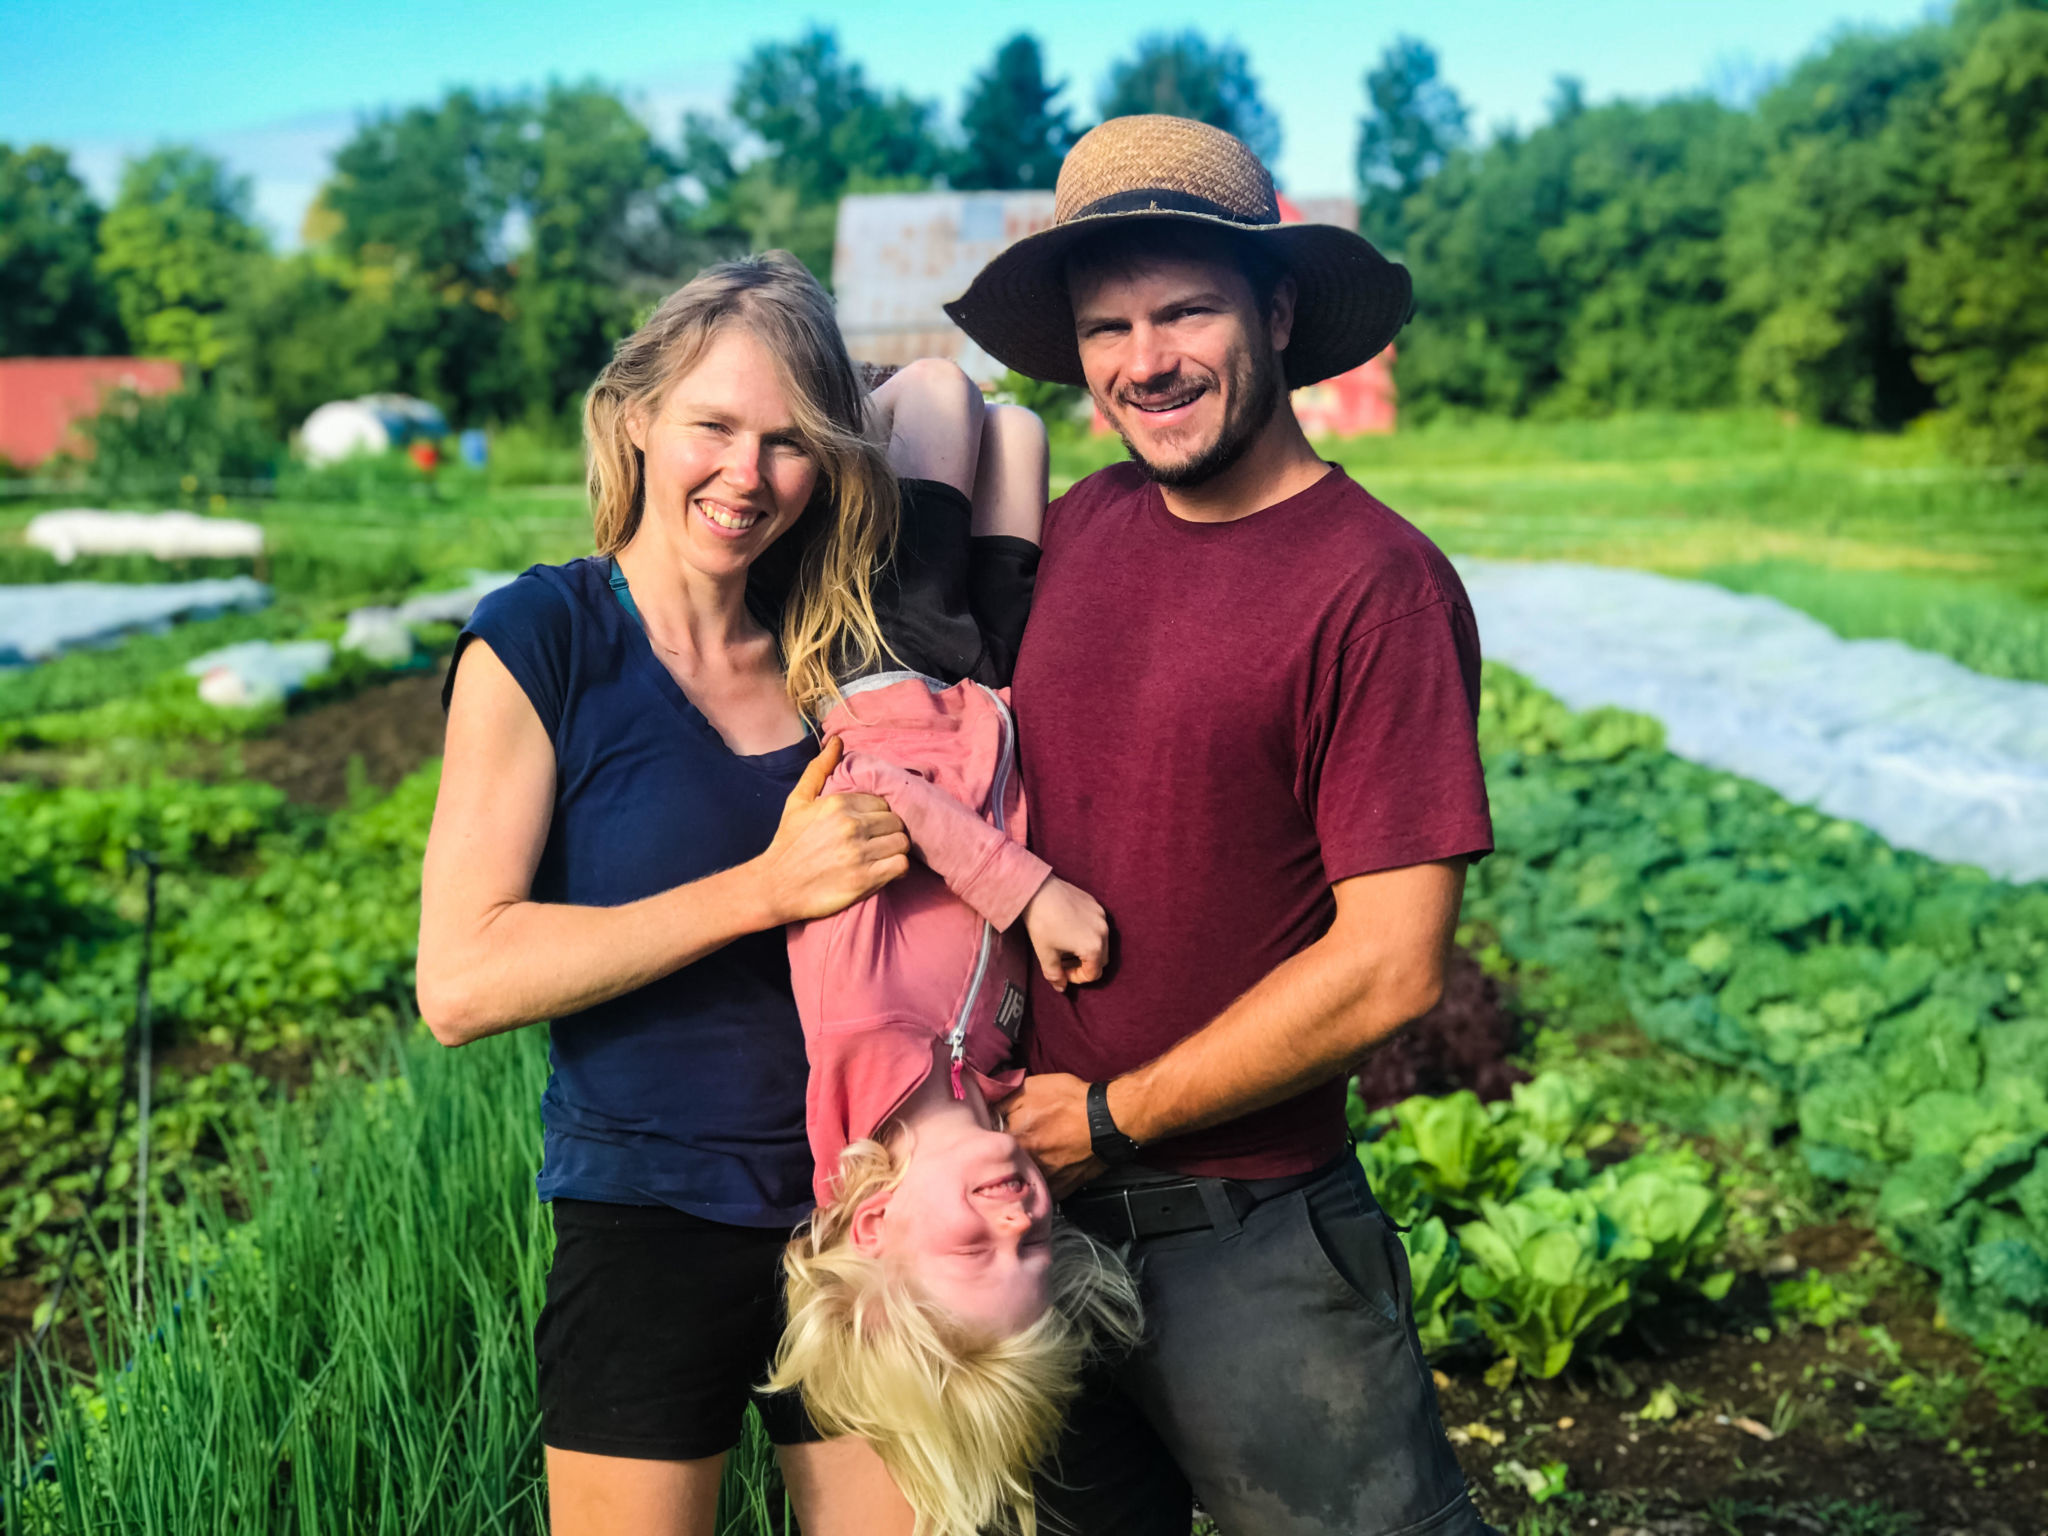 Jonathan and Jolianne, co-founders of Farm Fresh, posing in front of a field with their child.